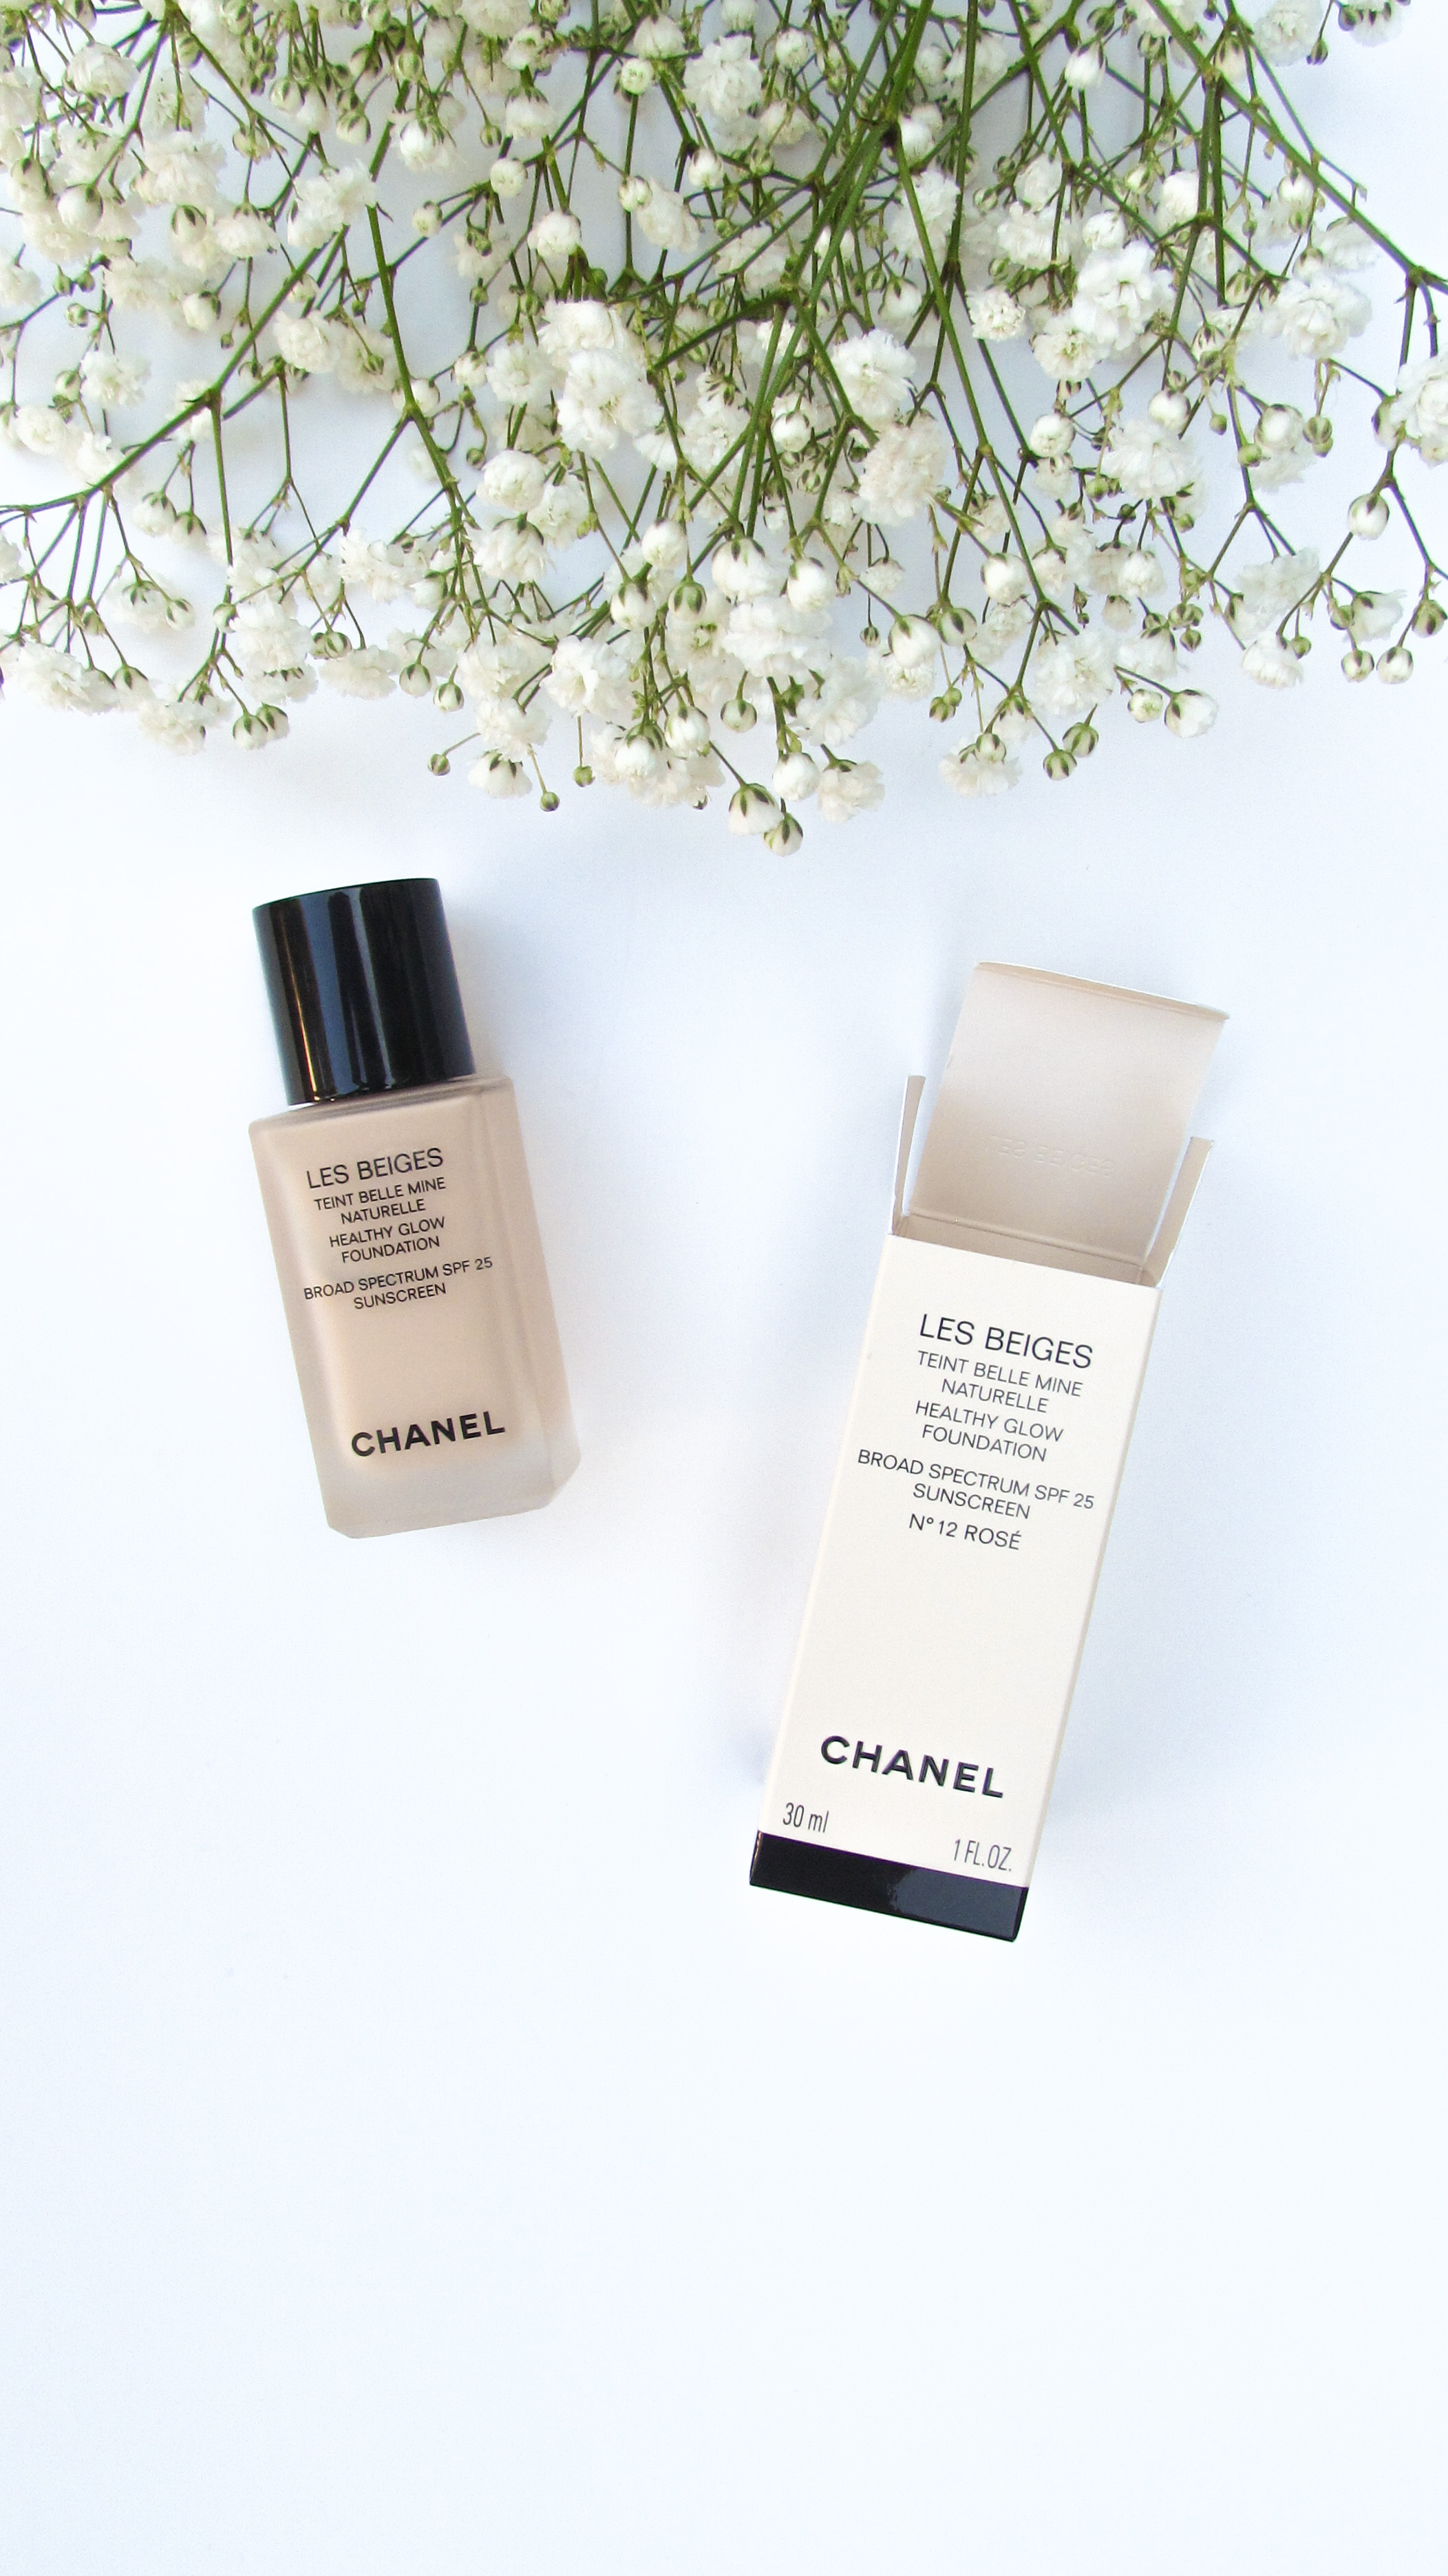 Chanel Les Beiges Healthy Glow Natural Eyeshadow Palette & Sheer